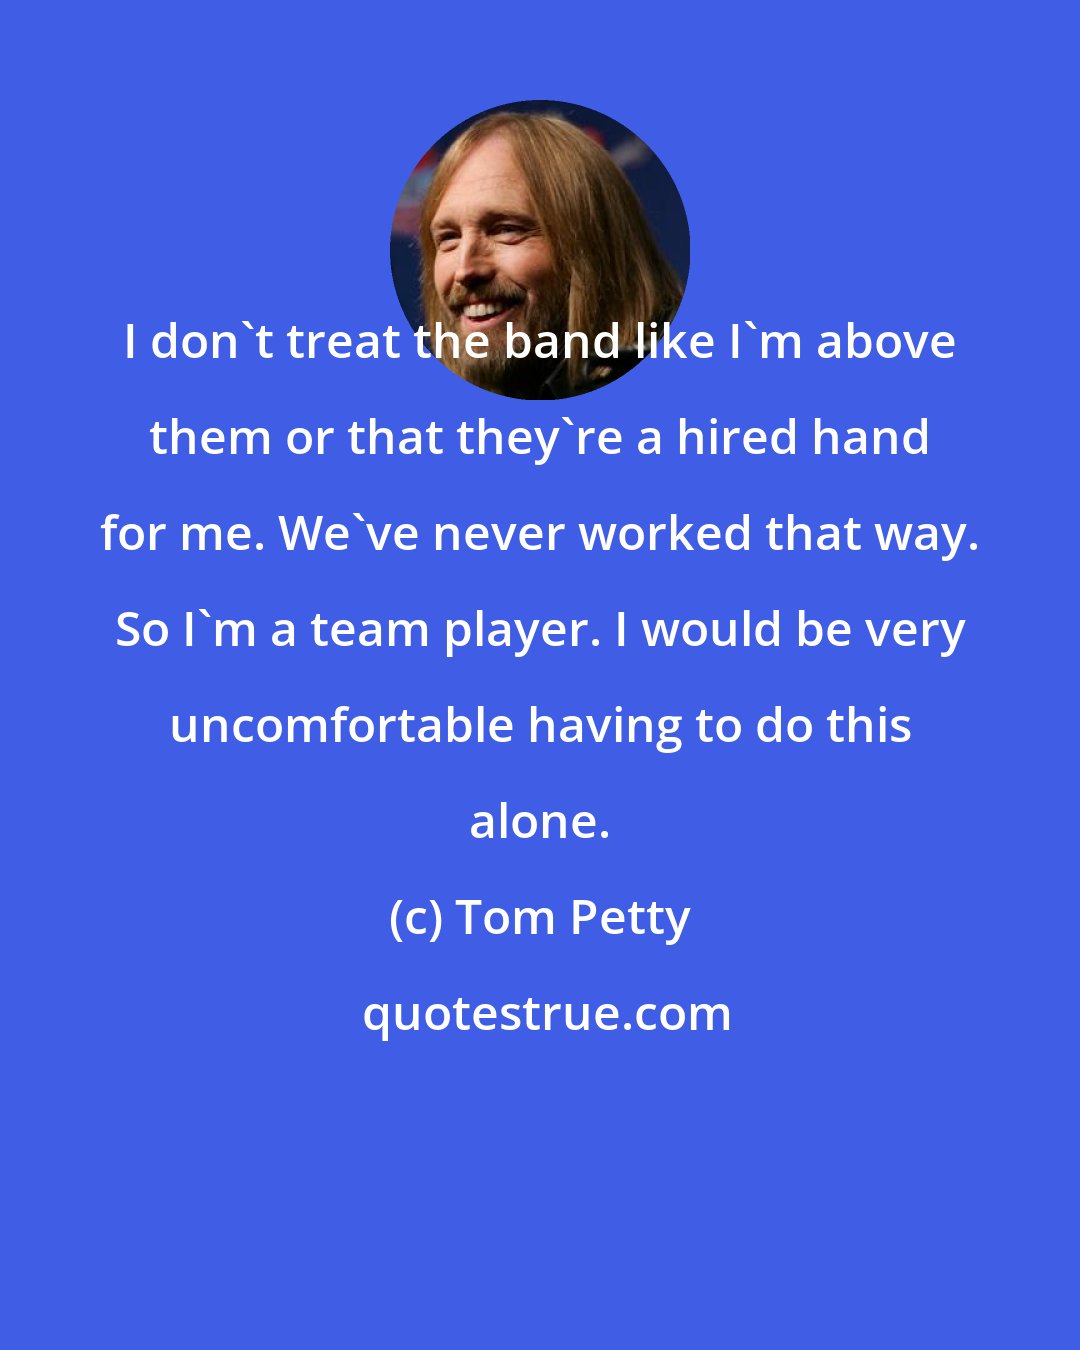 Tom Petty: I don't treat the band like I'm above them or that they're a hired hand for me. We've never worked that way. So I'm a team player. I would be very uncomfortable having to do this alone.